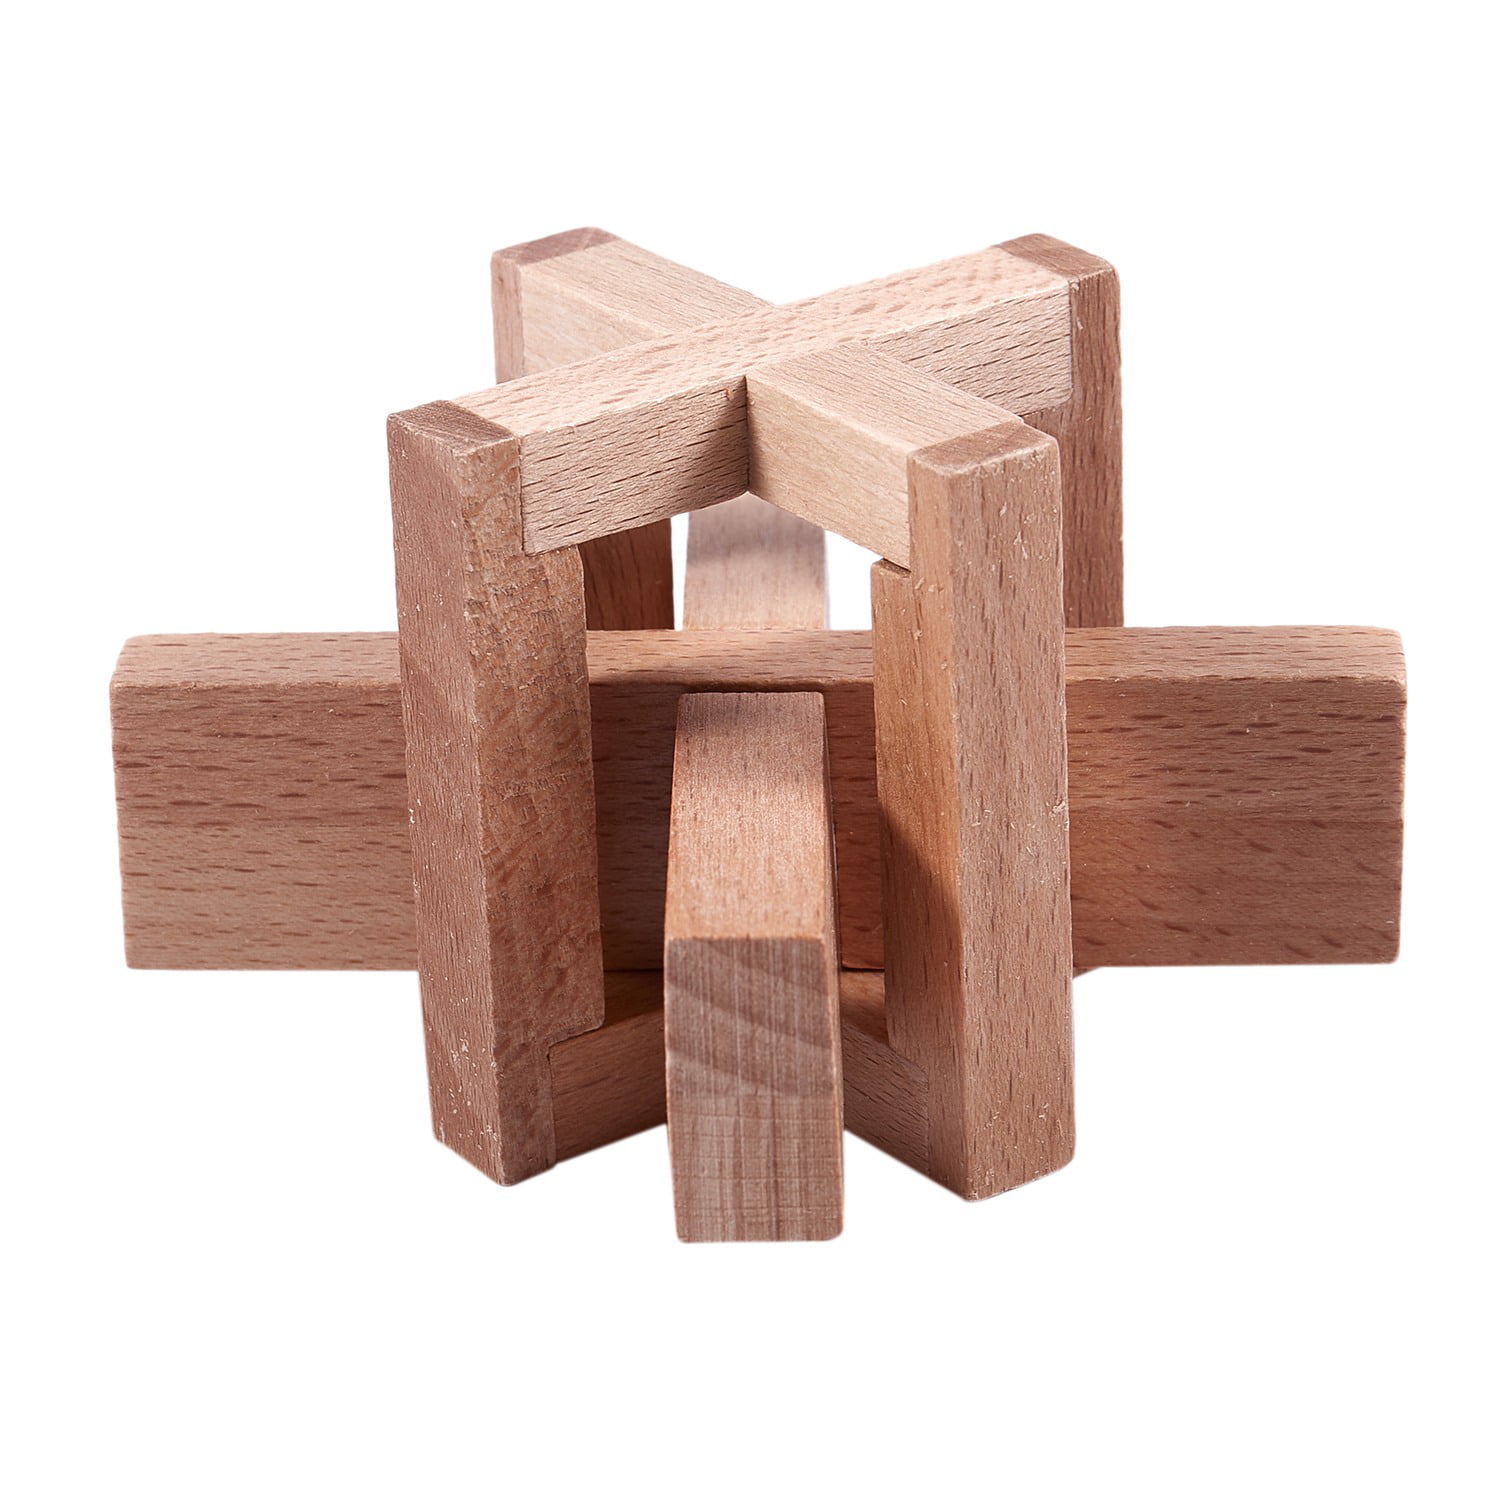 Wooden Hole Lock Brain Teaser Puzzles for Adults Kids IQ Challenge Toy SI 